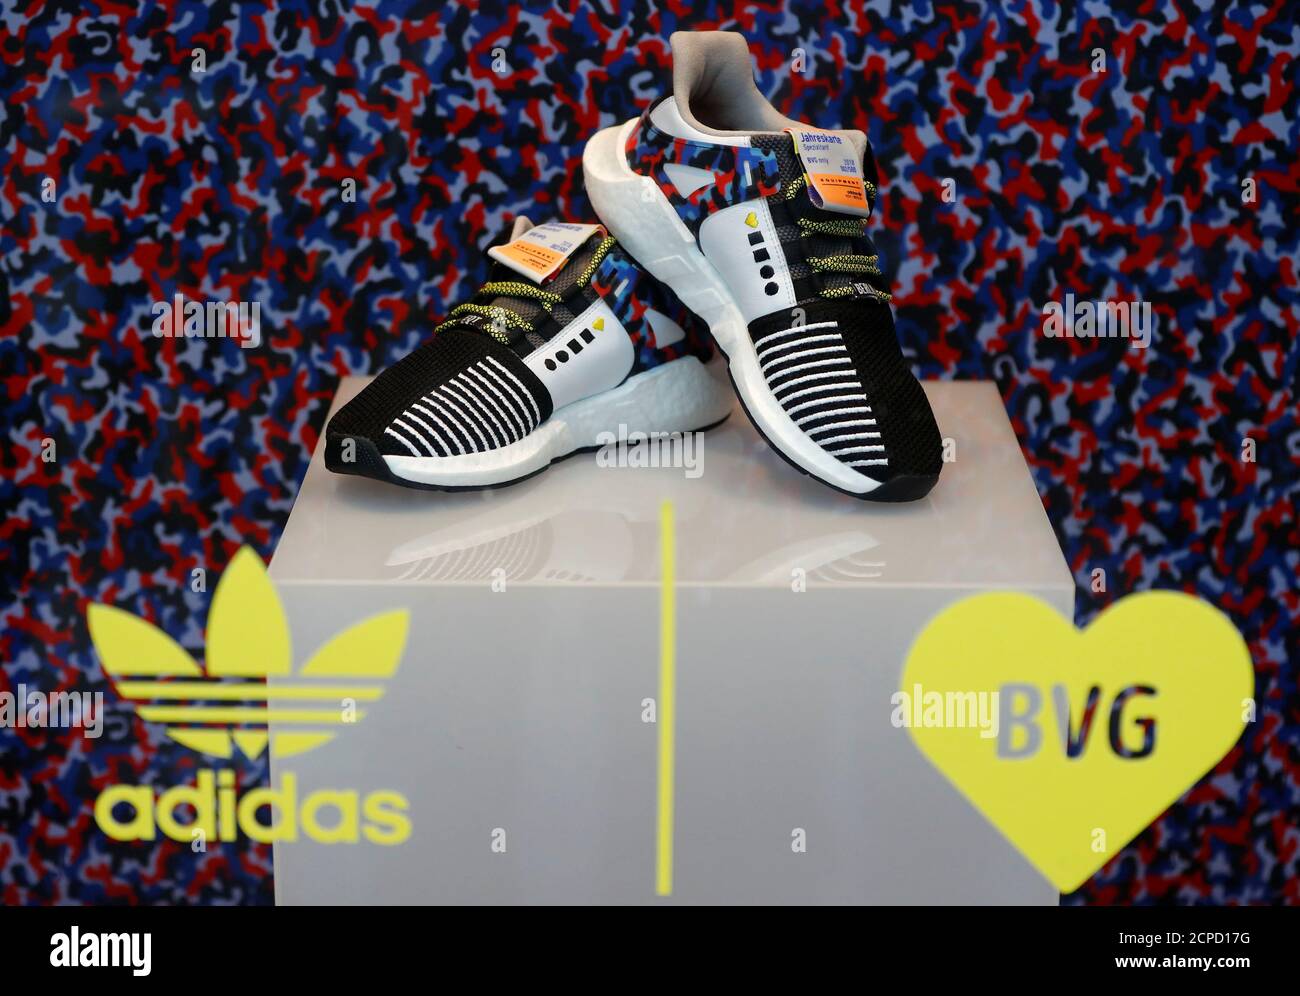 adidas limited edition sneakers 2018